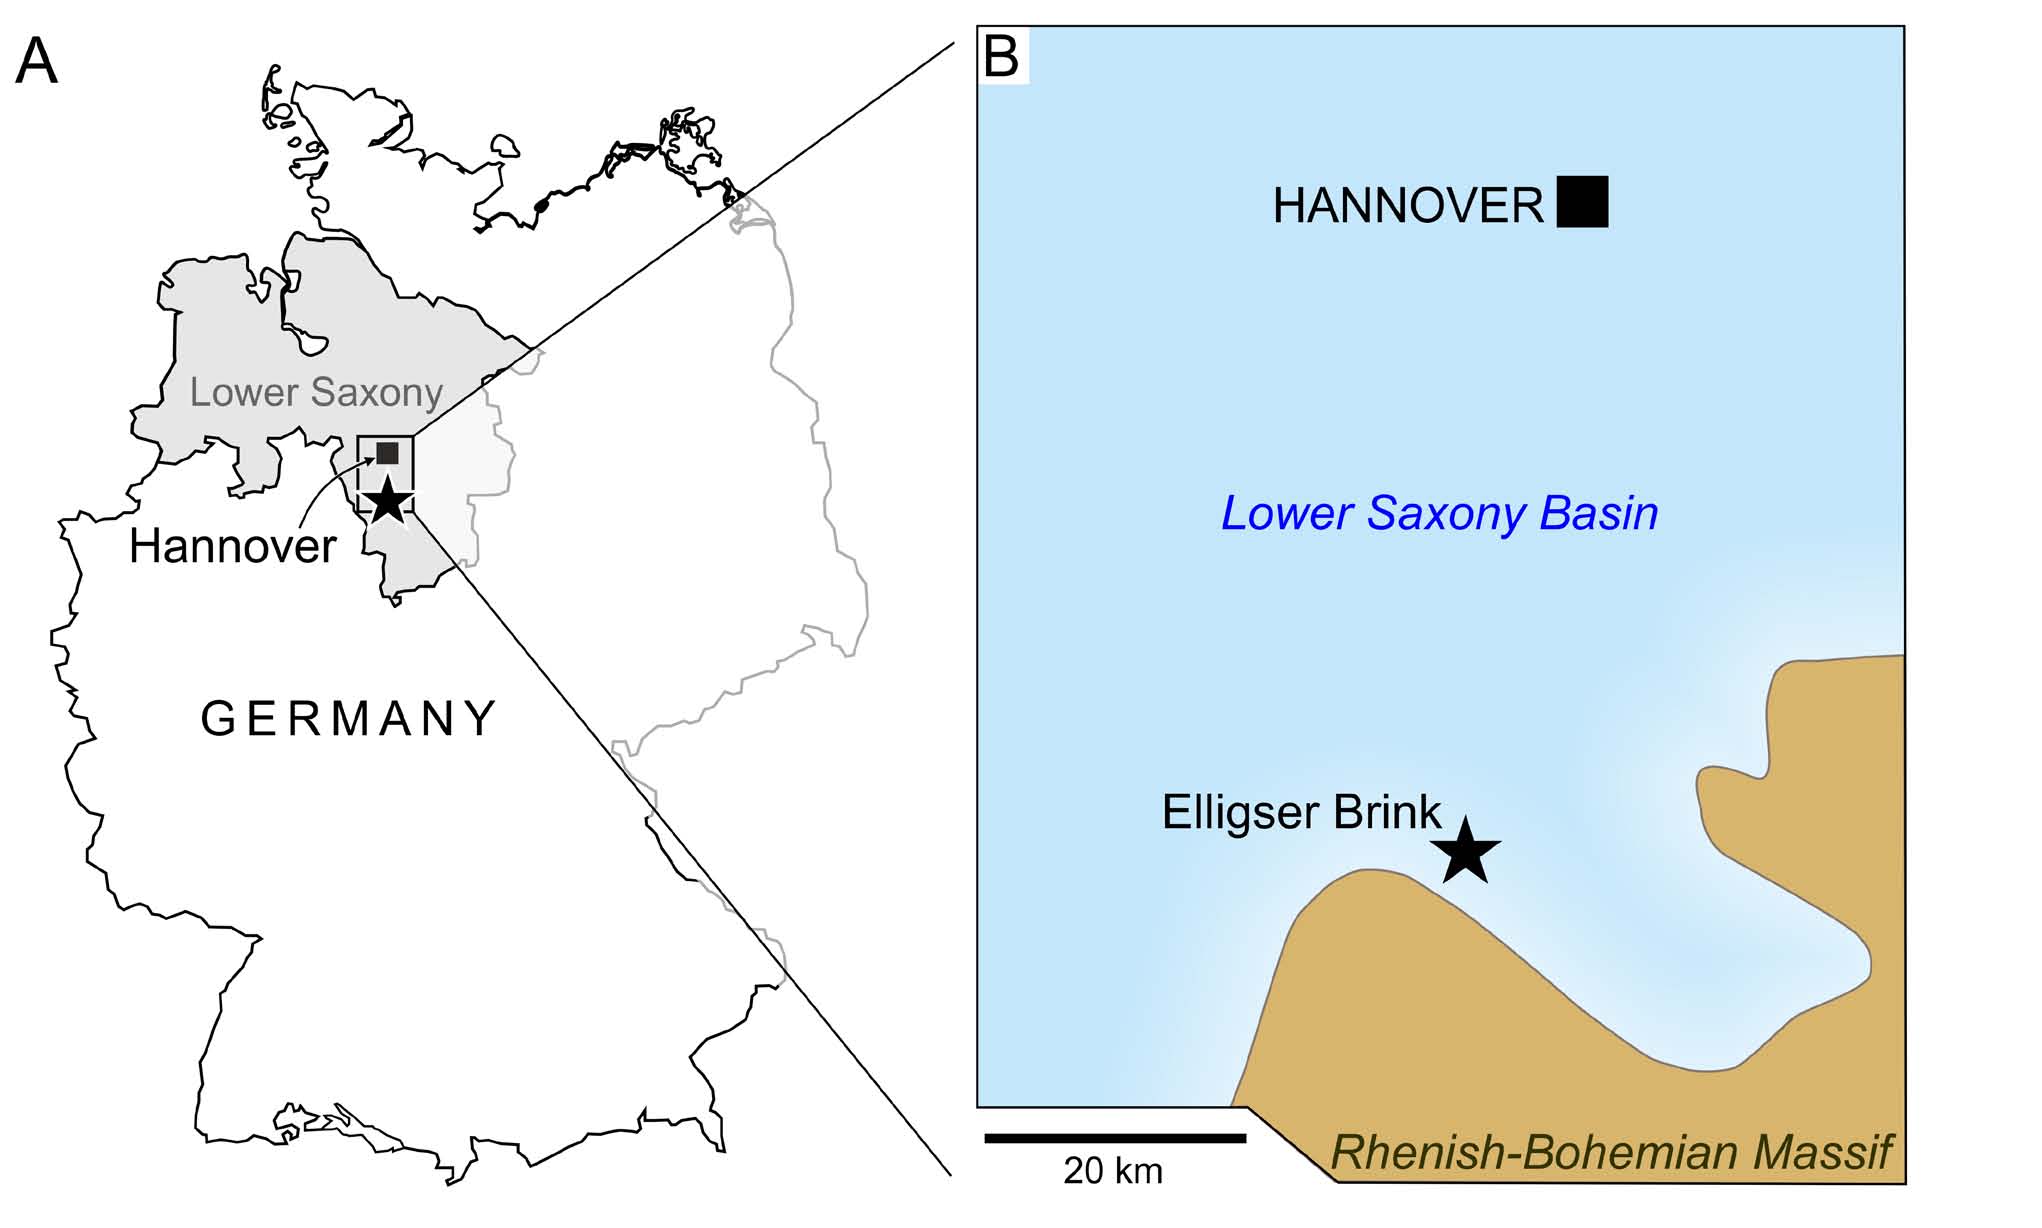 A) Location of the Elligser Brink locality in the Hils mountains (asterisk) of southern Lower Saxony (frame); B) Palaeogeography of southern Lower Saxony during the Hauterivian (after Mutterlose, 1984), indicating the near-shore position of the Elligser Brink.